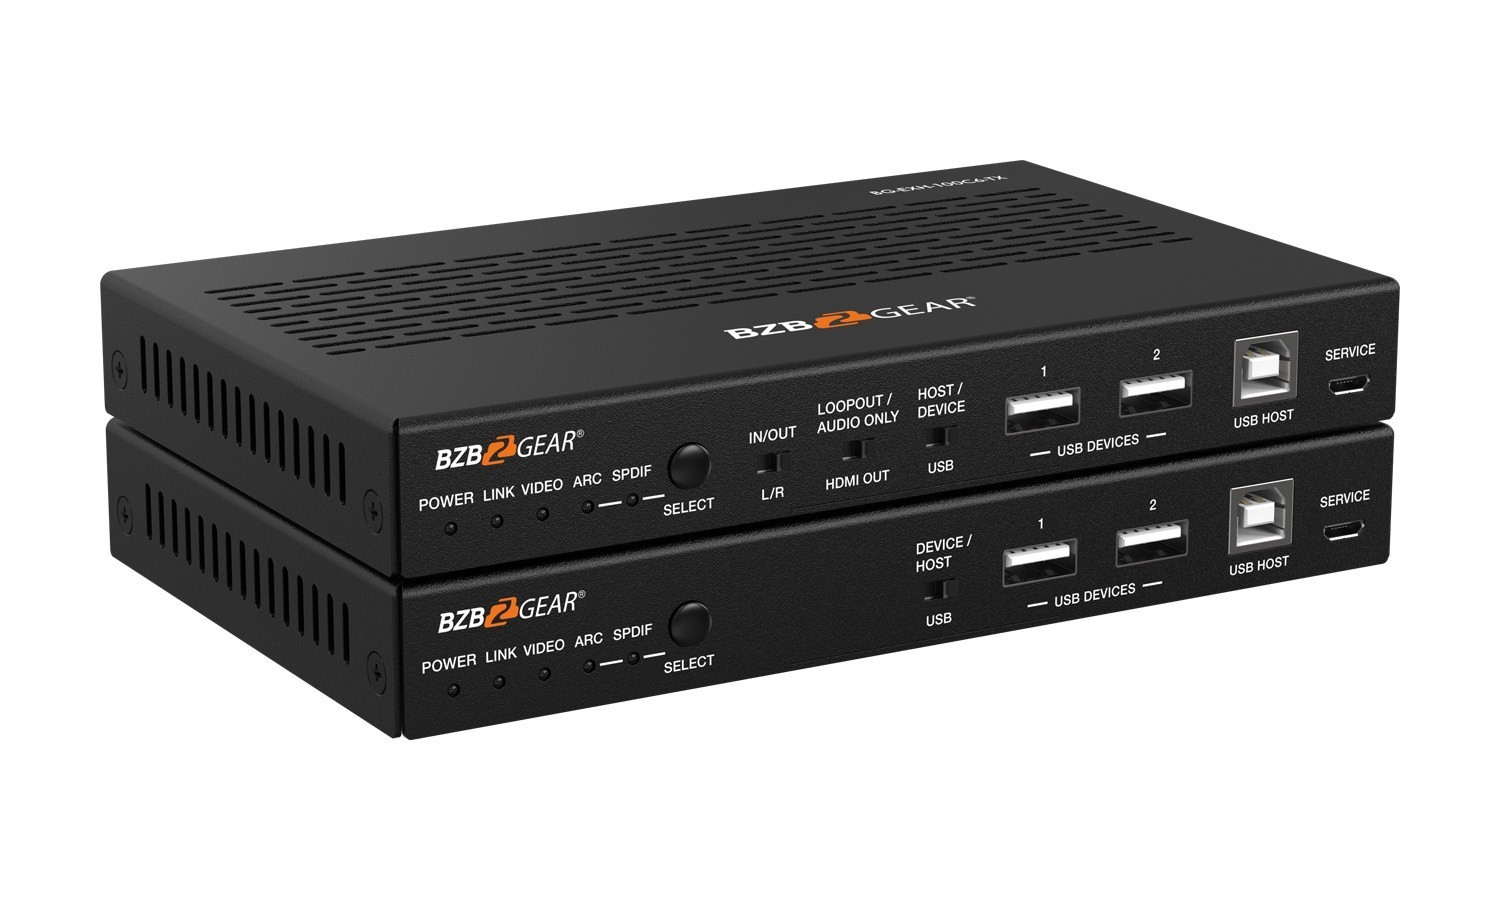 BG-EXH-100C6 4K 18Gbps UHD HDMI HDBaseT 3.0 Extender Over Category 6/7 Cable with IR/eARC/ARC/POC/Ethernet/USB/RS-232 up to 330ft by BZBGEAR